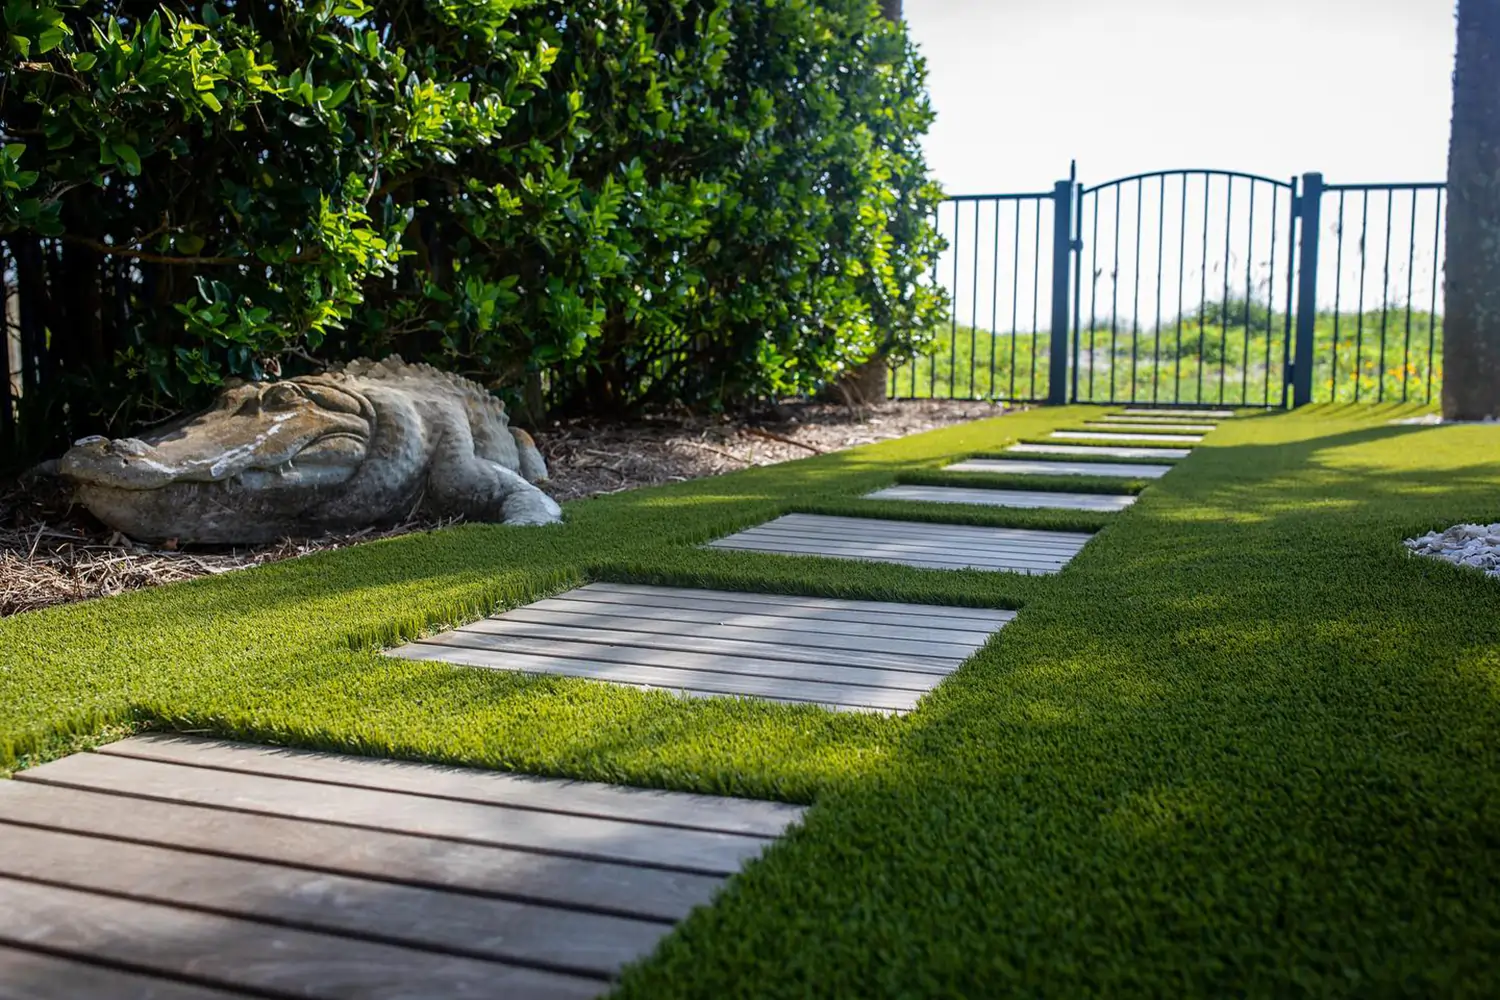 Ceramic aligator on artificial grass lawn from SYNLawn